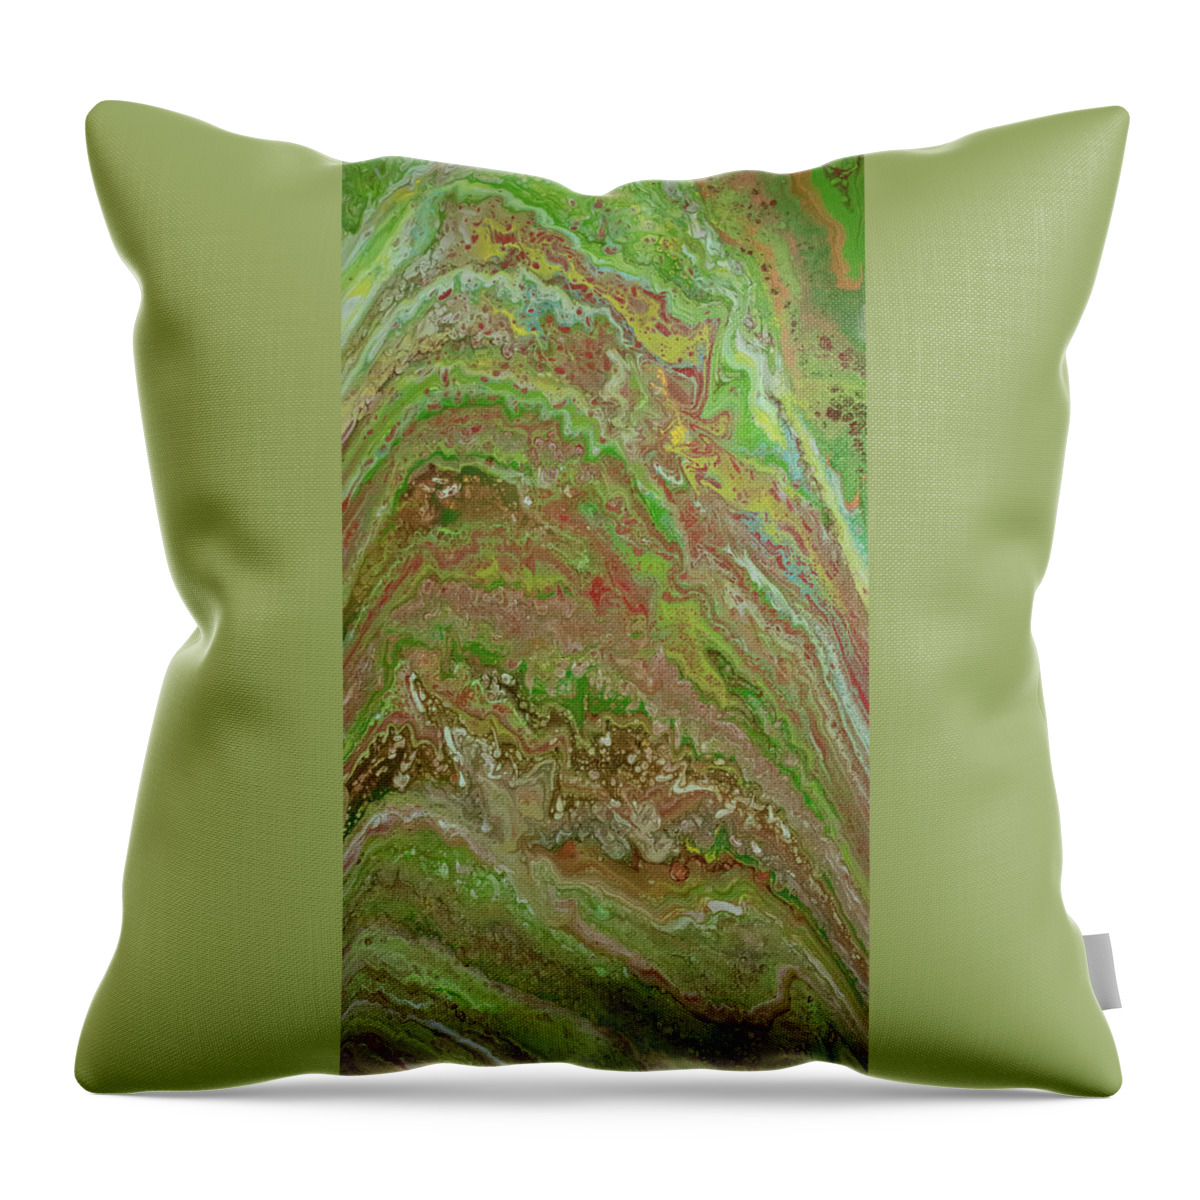 Green Throw Pillow featuring the mixed media Forest Pour by Aimee Bruno